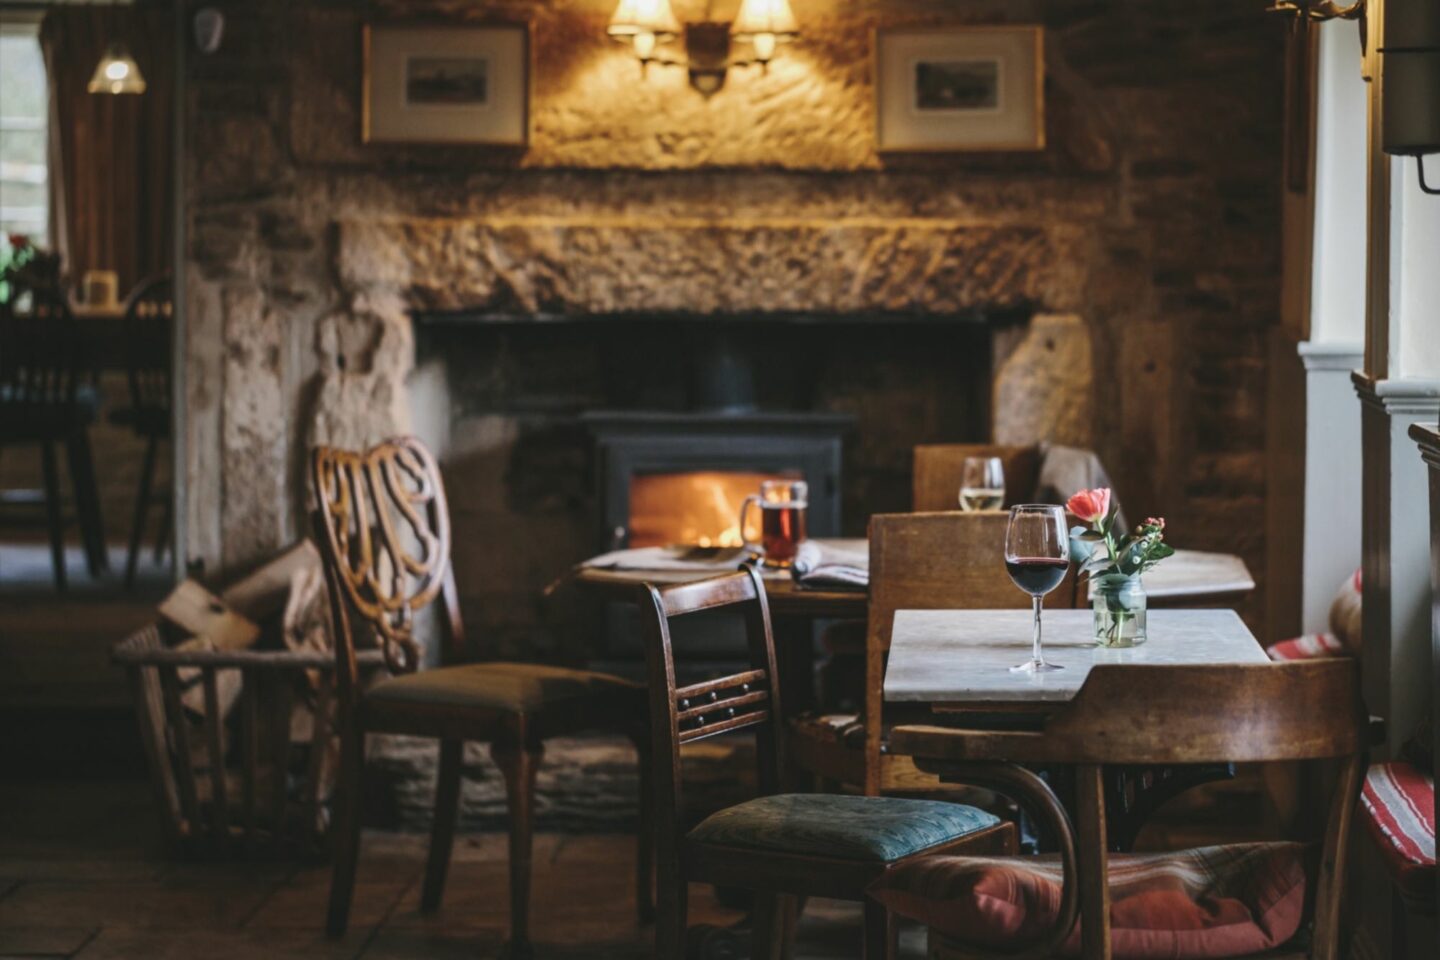 The Potting Shed Restaurant in the Cotswolds